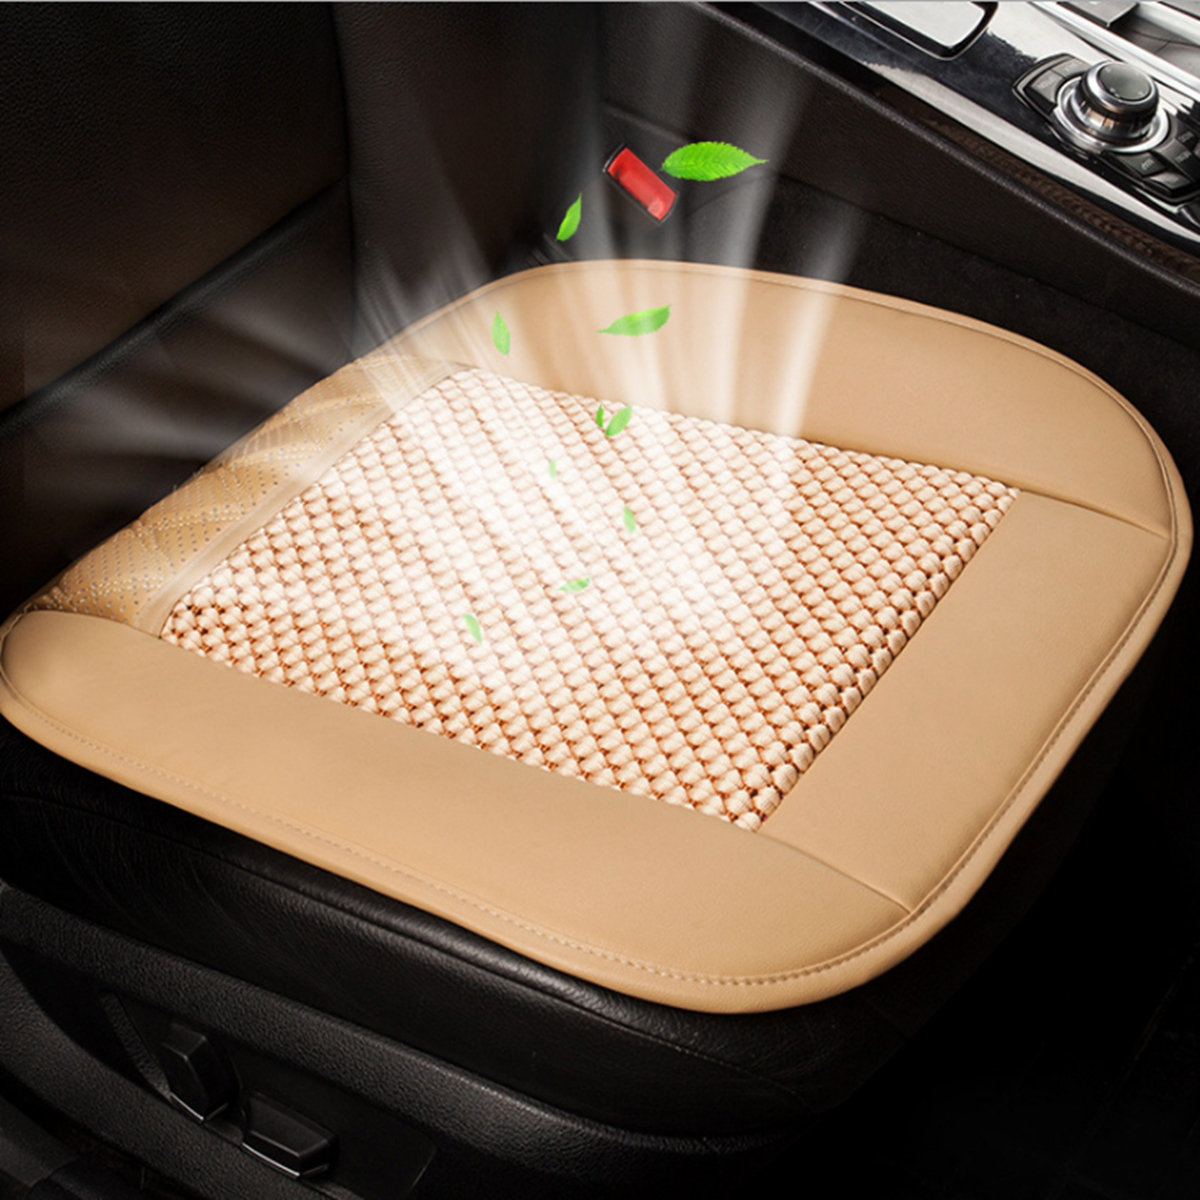 12V Cooling Car Seat Cushion Ventilate Breathable Air Flow Holes PU Leather + Mesh - Auto GoShop